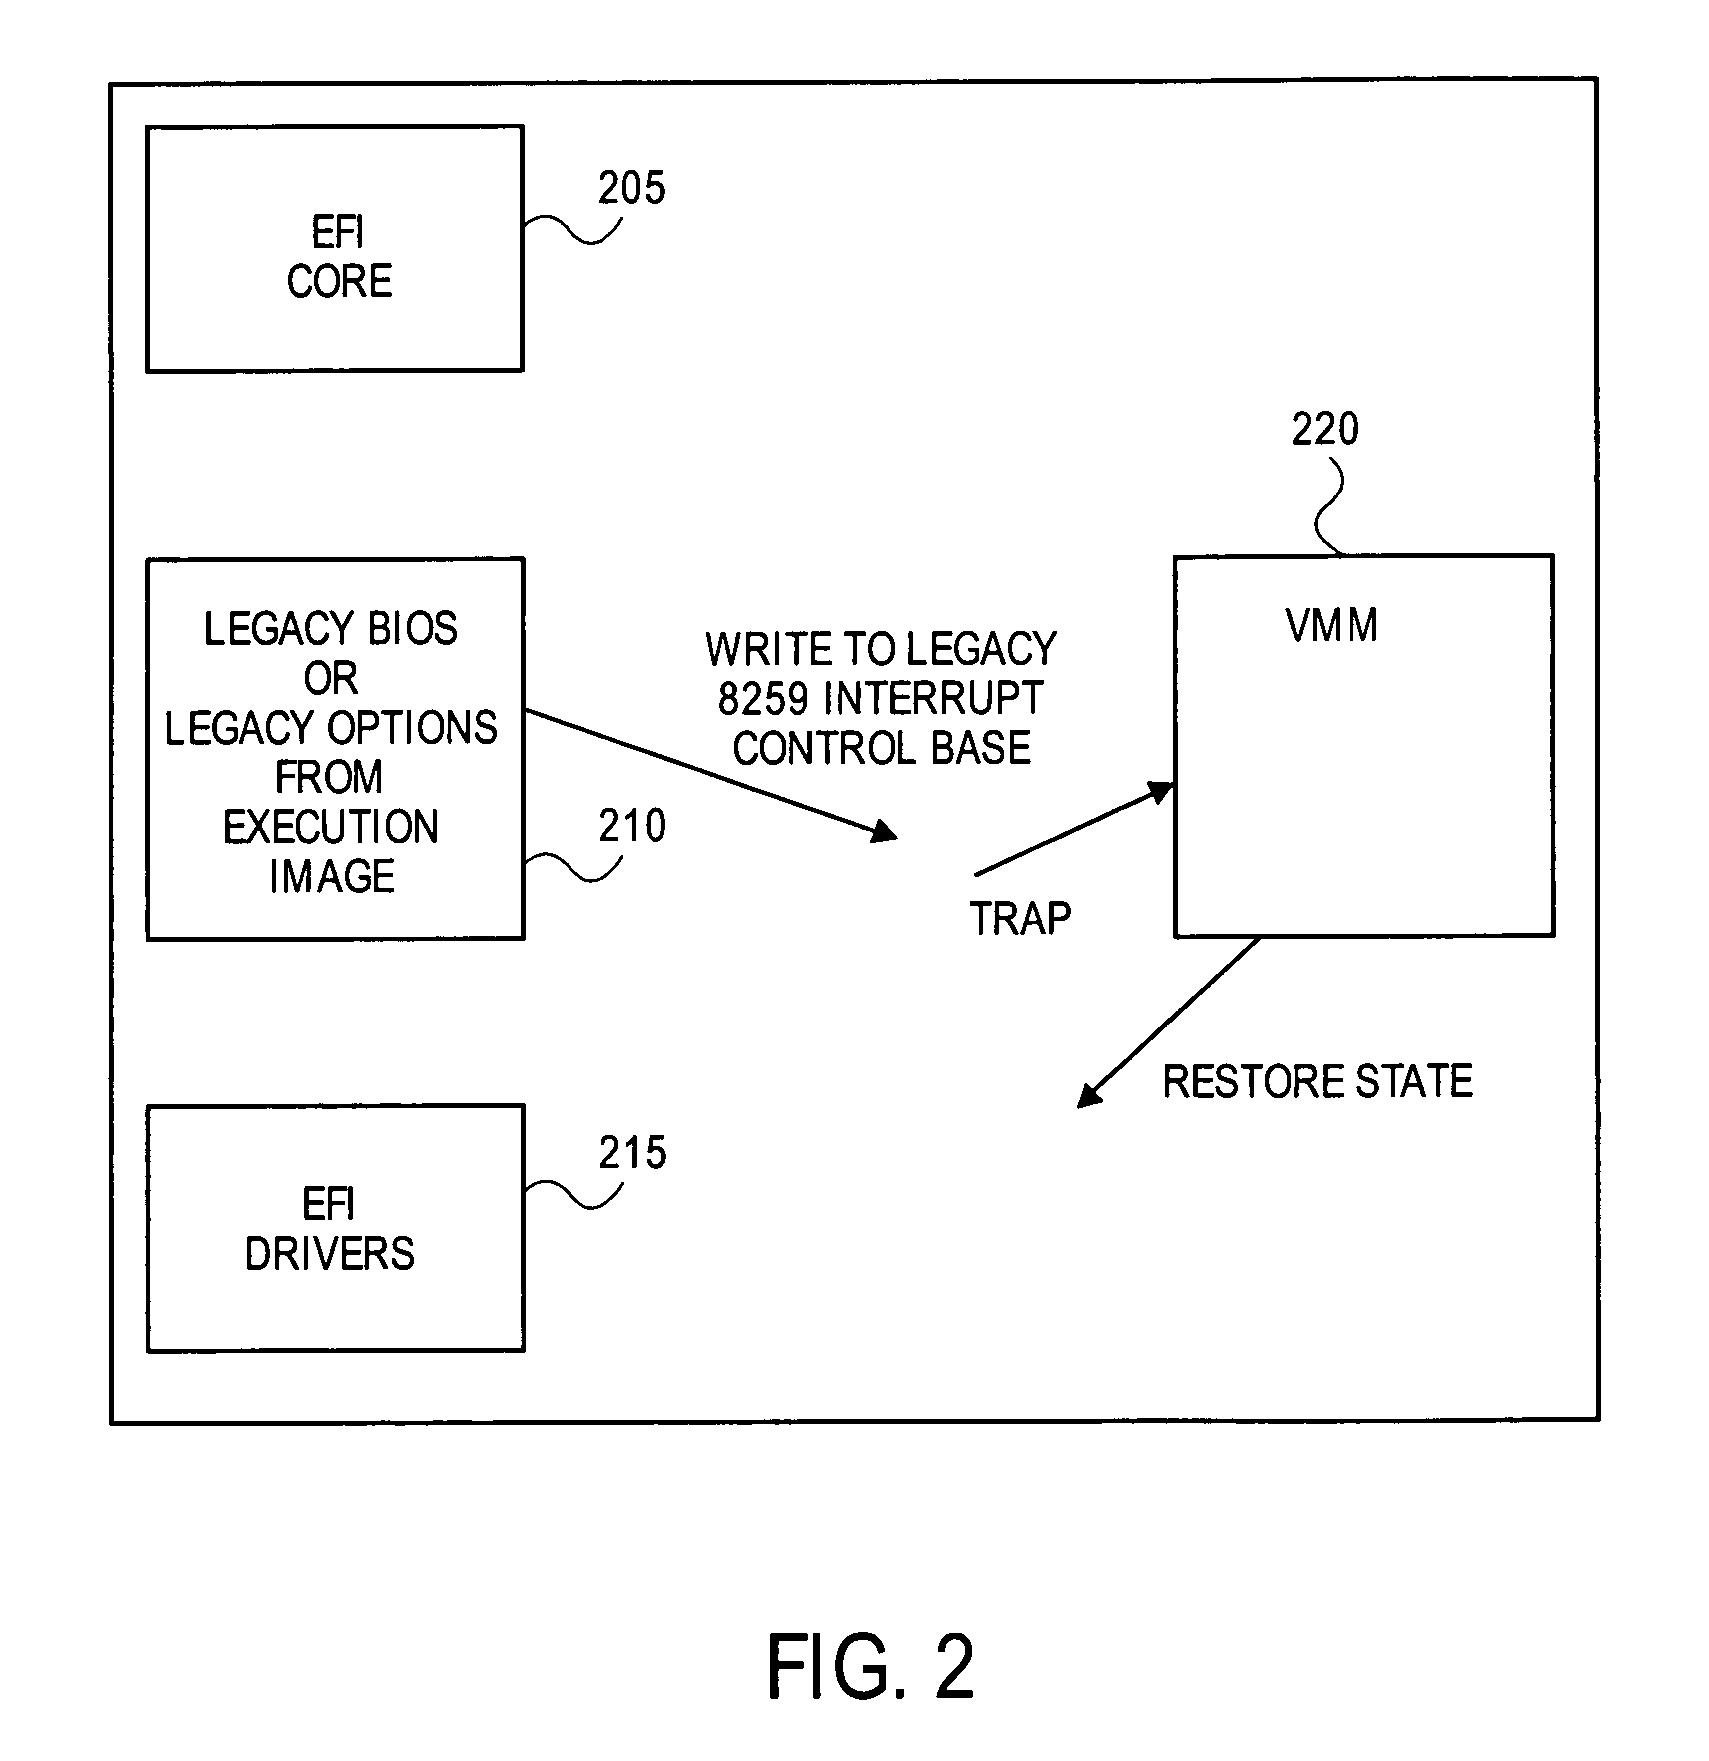 Method for providing system integrity and legacy environment emulation